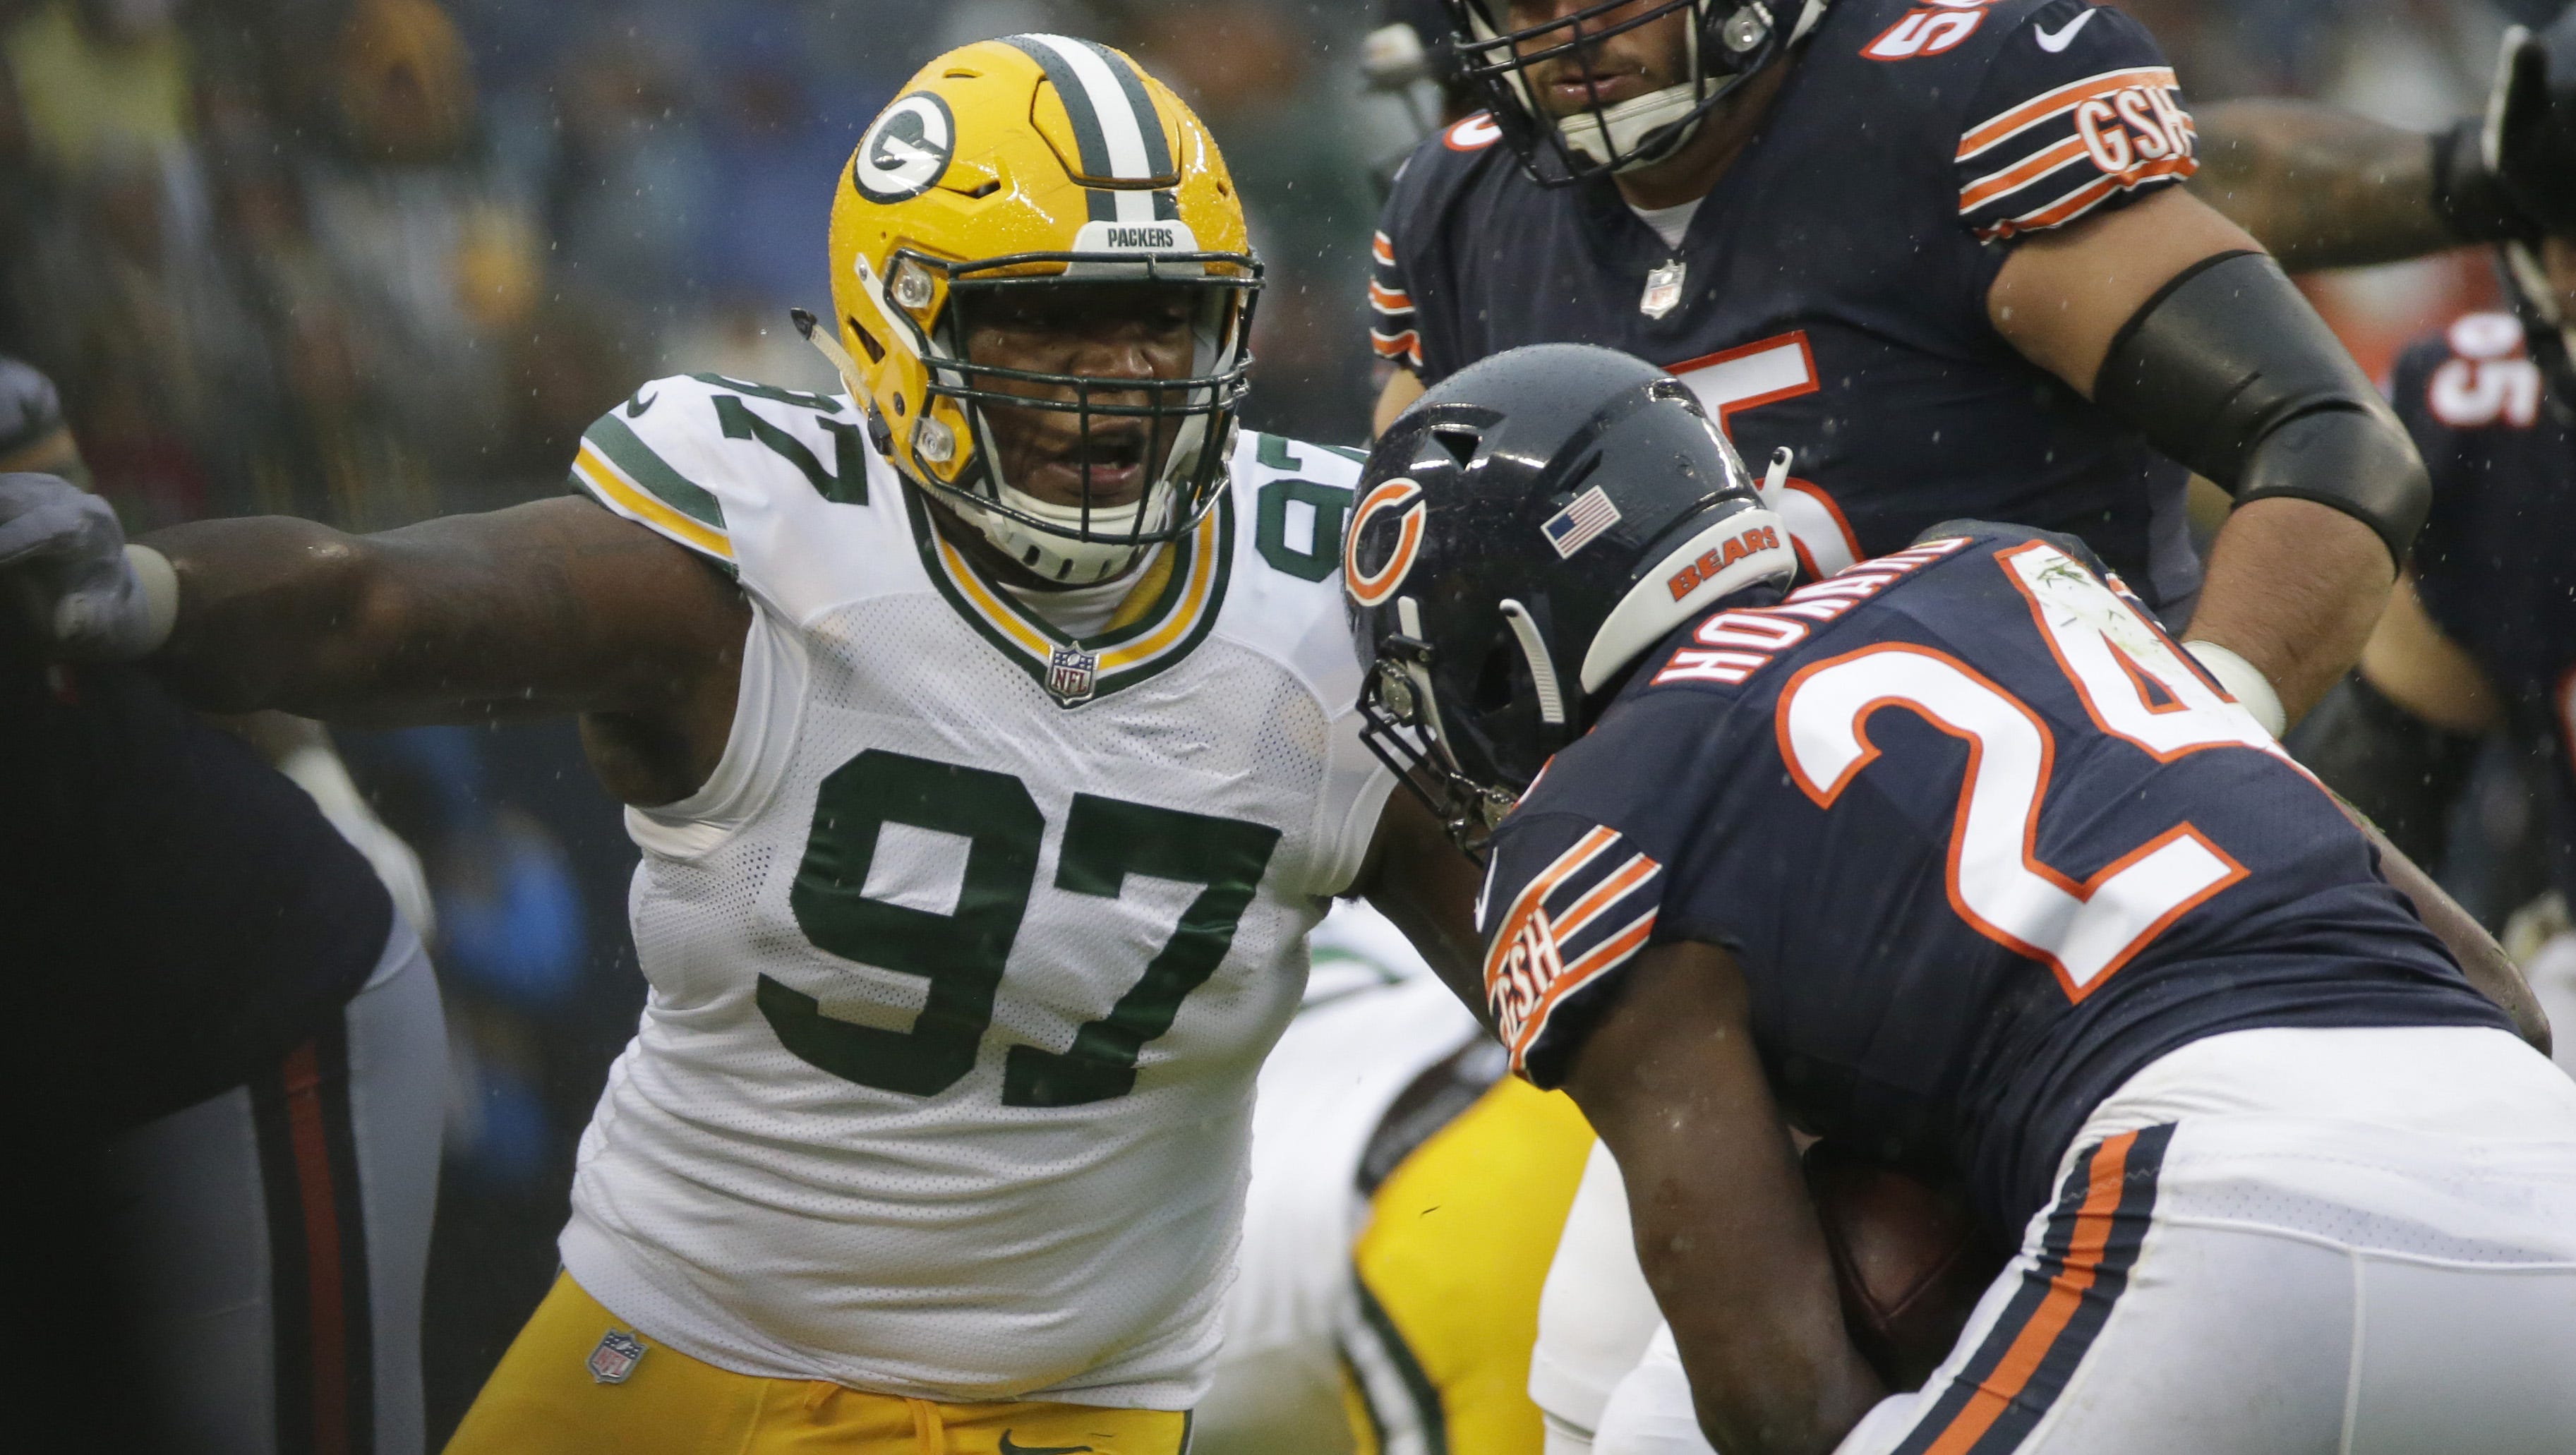 Green Bay Packers nose tackle Kenny Clark (97) misses a tackle on Chicago Bears running back Jordan Howard (24) during the first quarter of their game Sunday, November 12, 2017 at Soldier Field in Chicago, Ill. The Green Bay Packers beat the Chicago Bears 23-16.

MARK HOFFMAN/MILWAUKEE JOURNAL SENTINEL